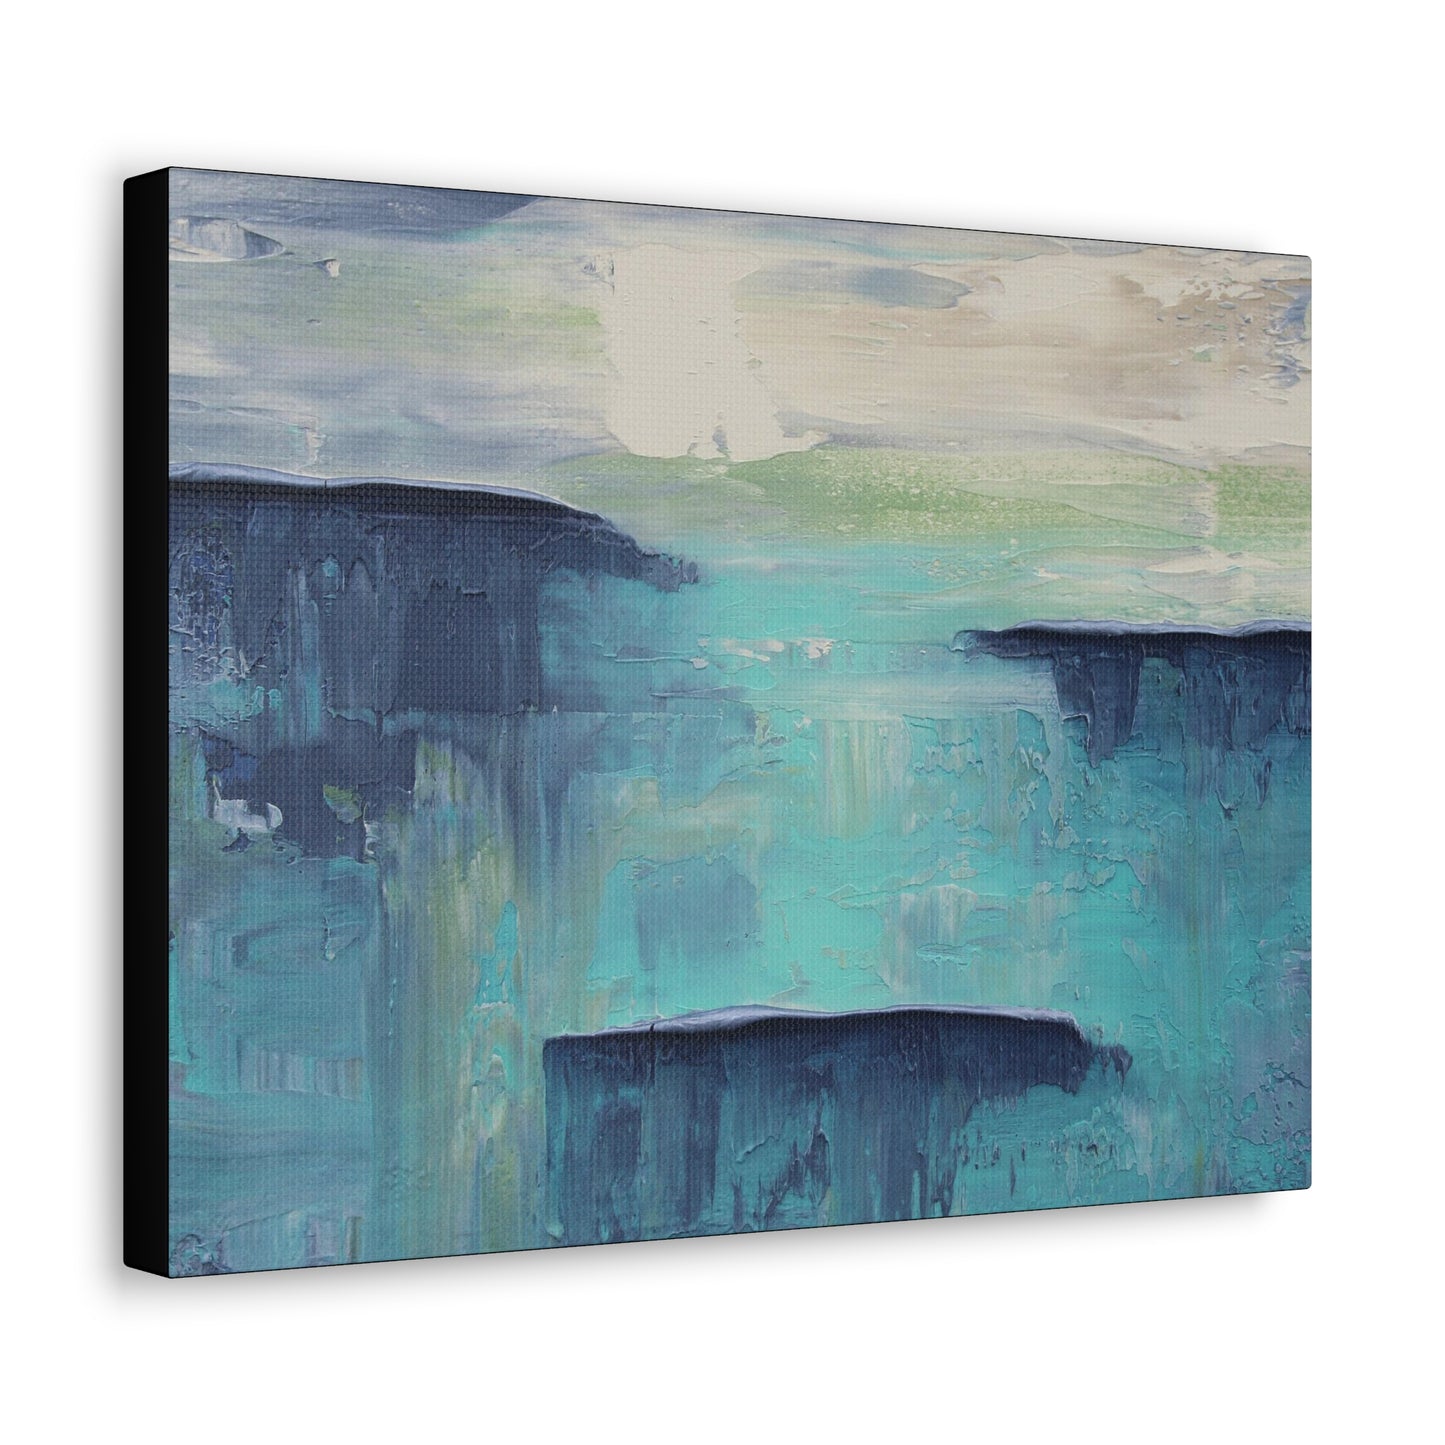 Leaving Space - Unframed Gallery Wrapped Canvas